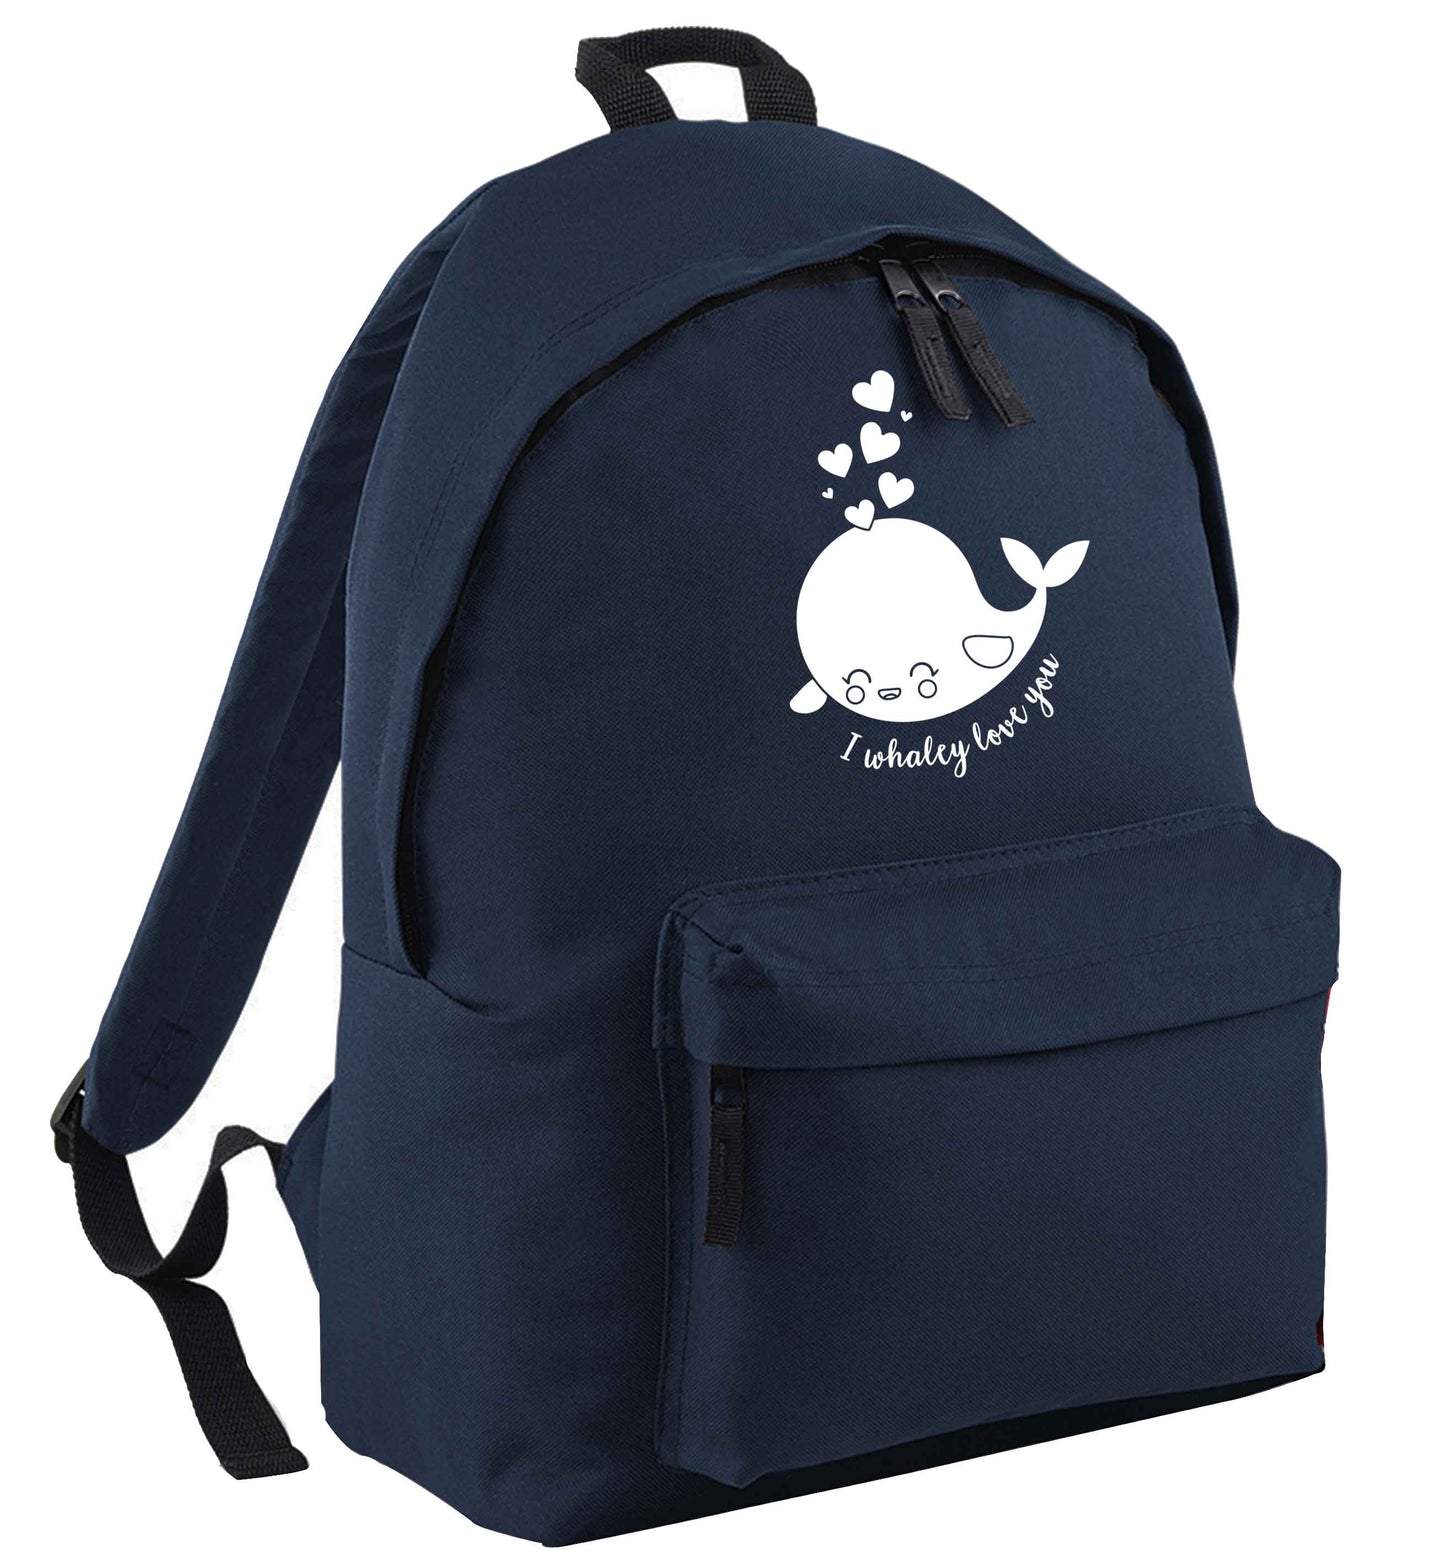 I whaley love you navy adults backpack